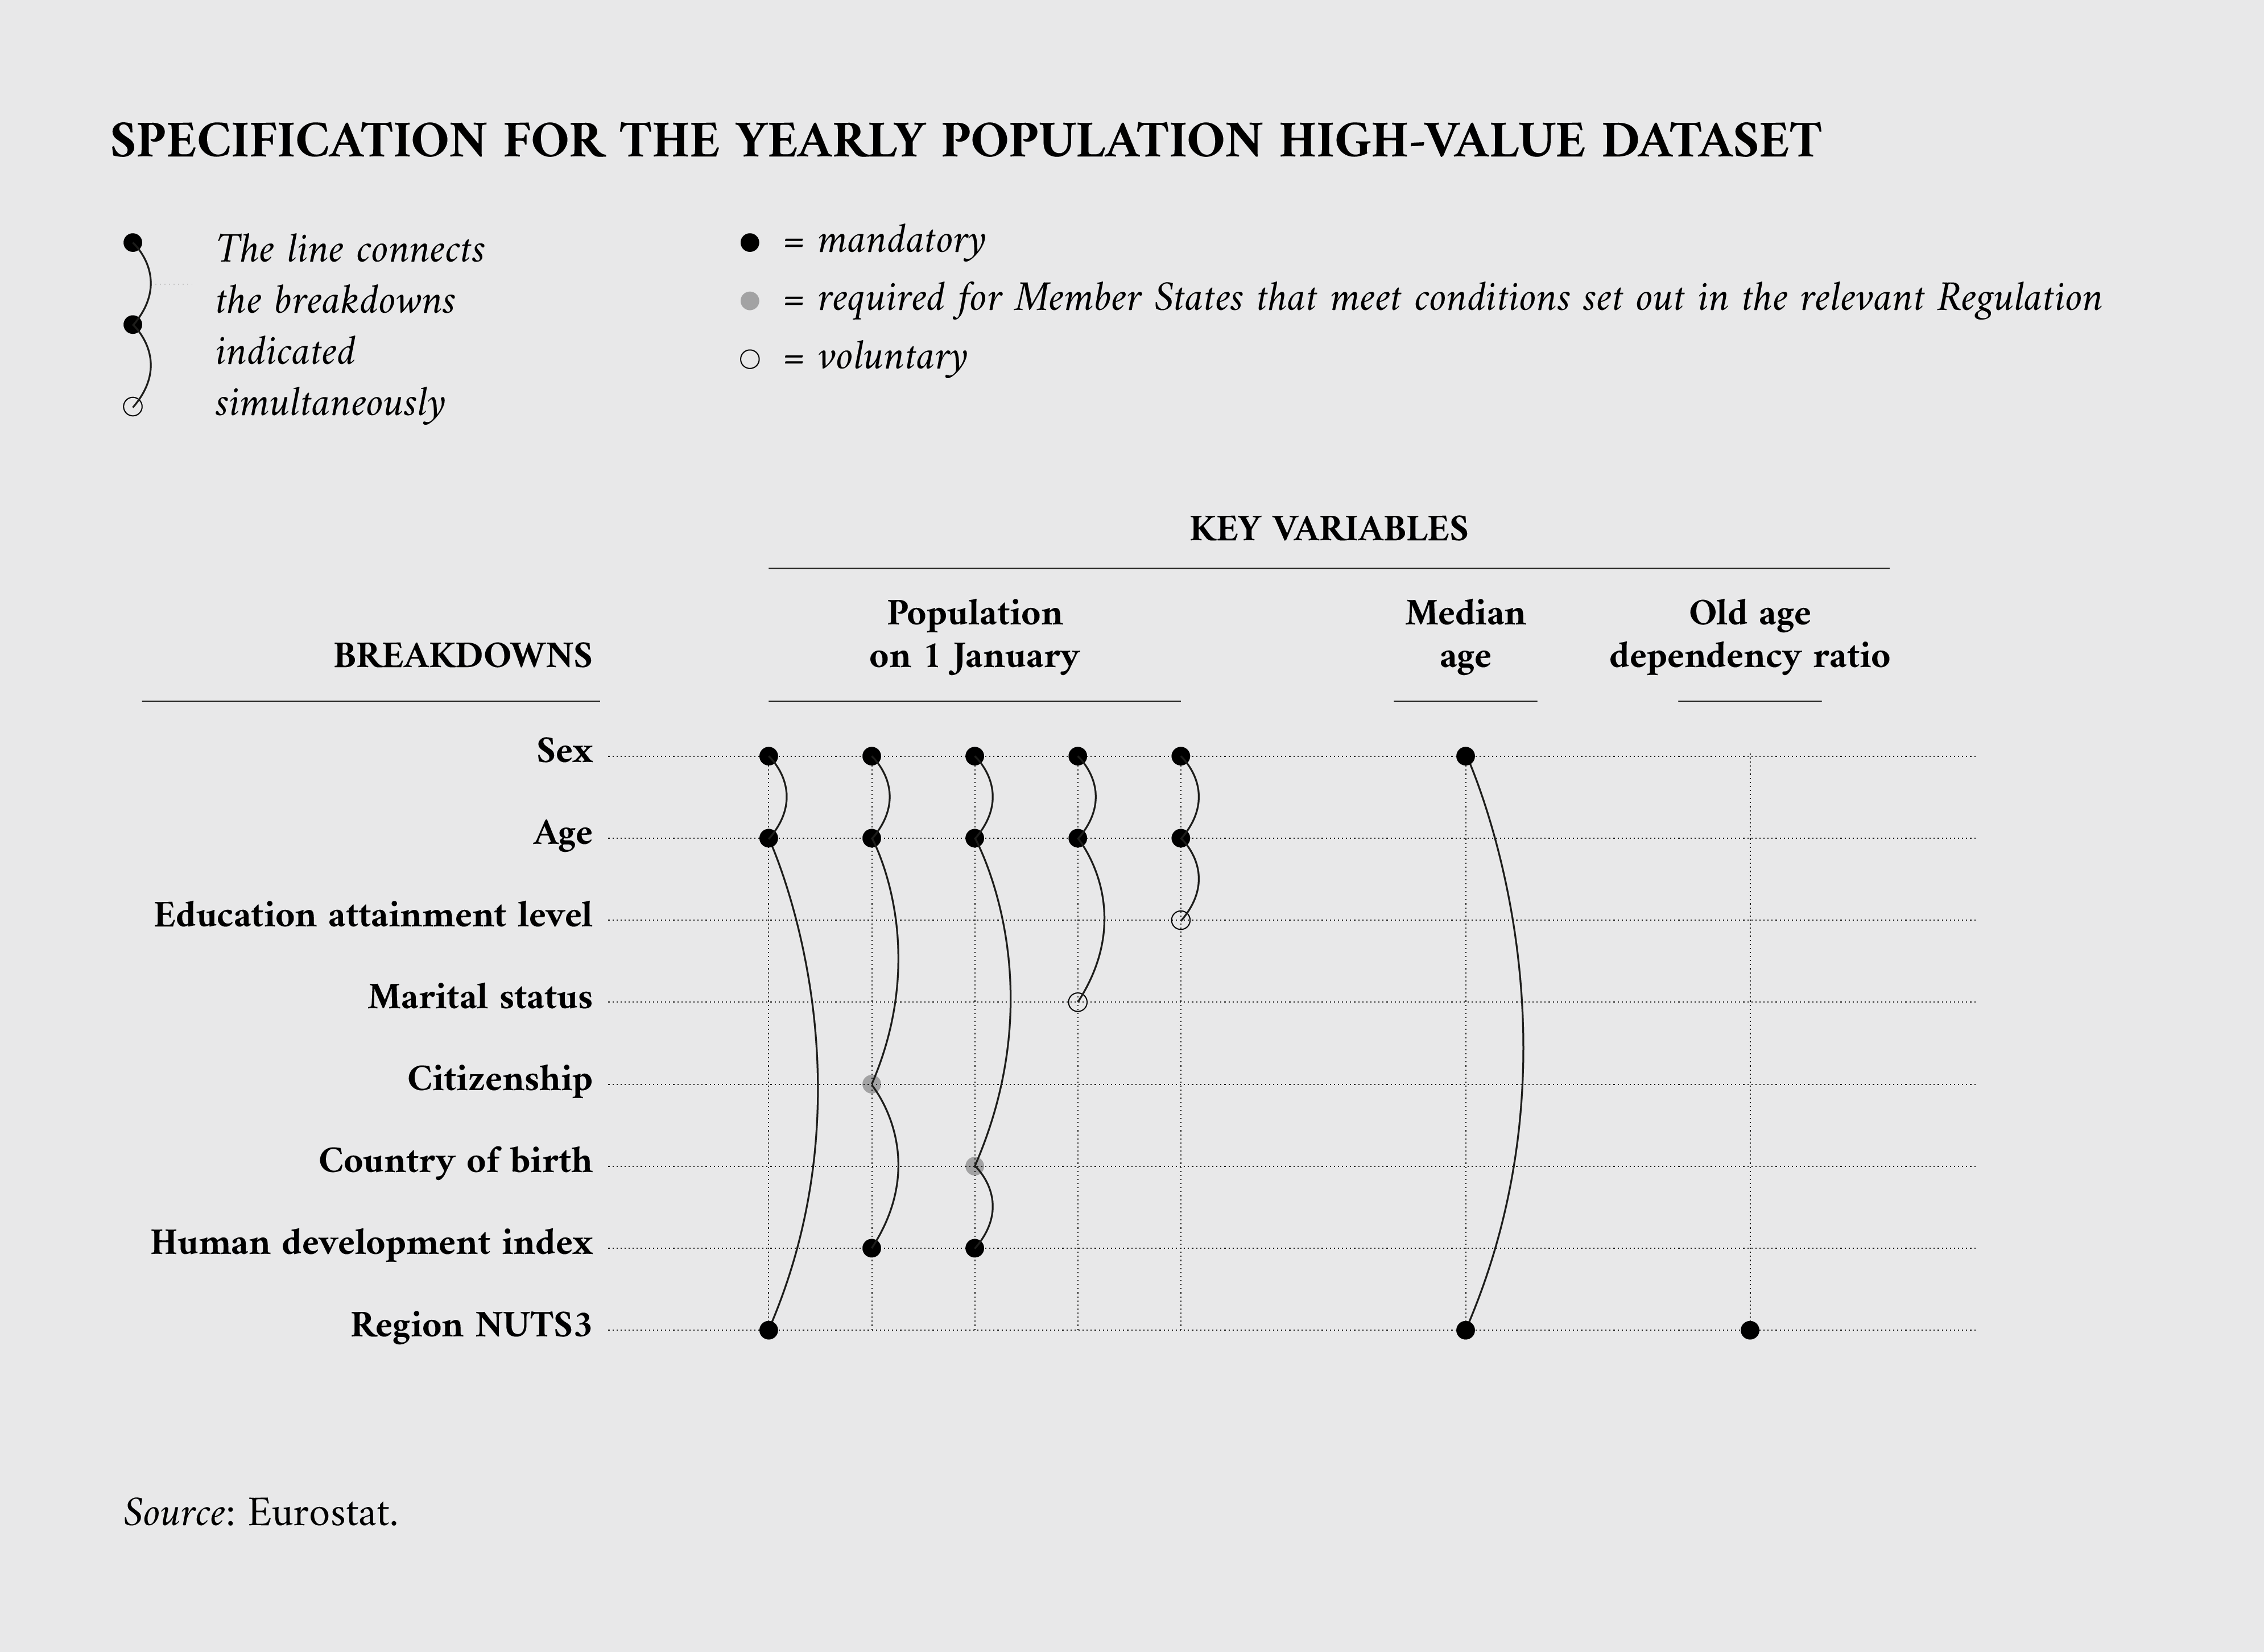 Specification for the yearly population high-value dataset